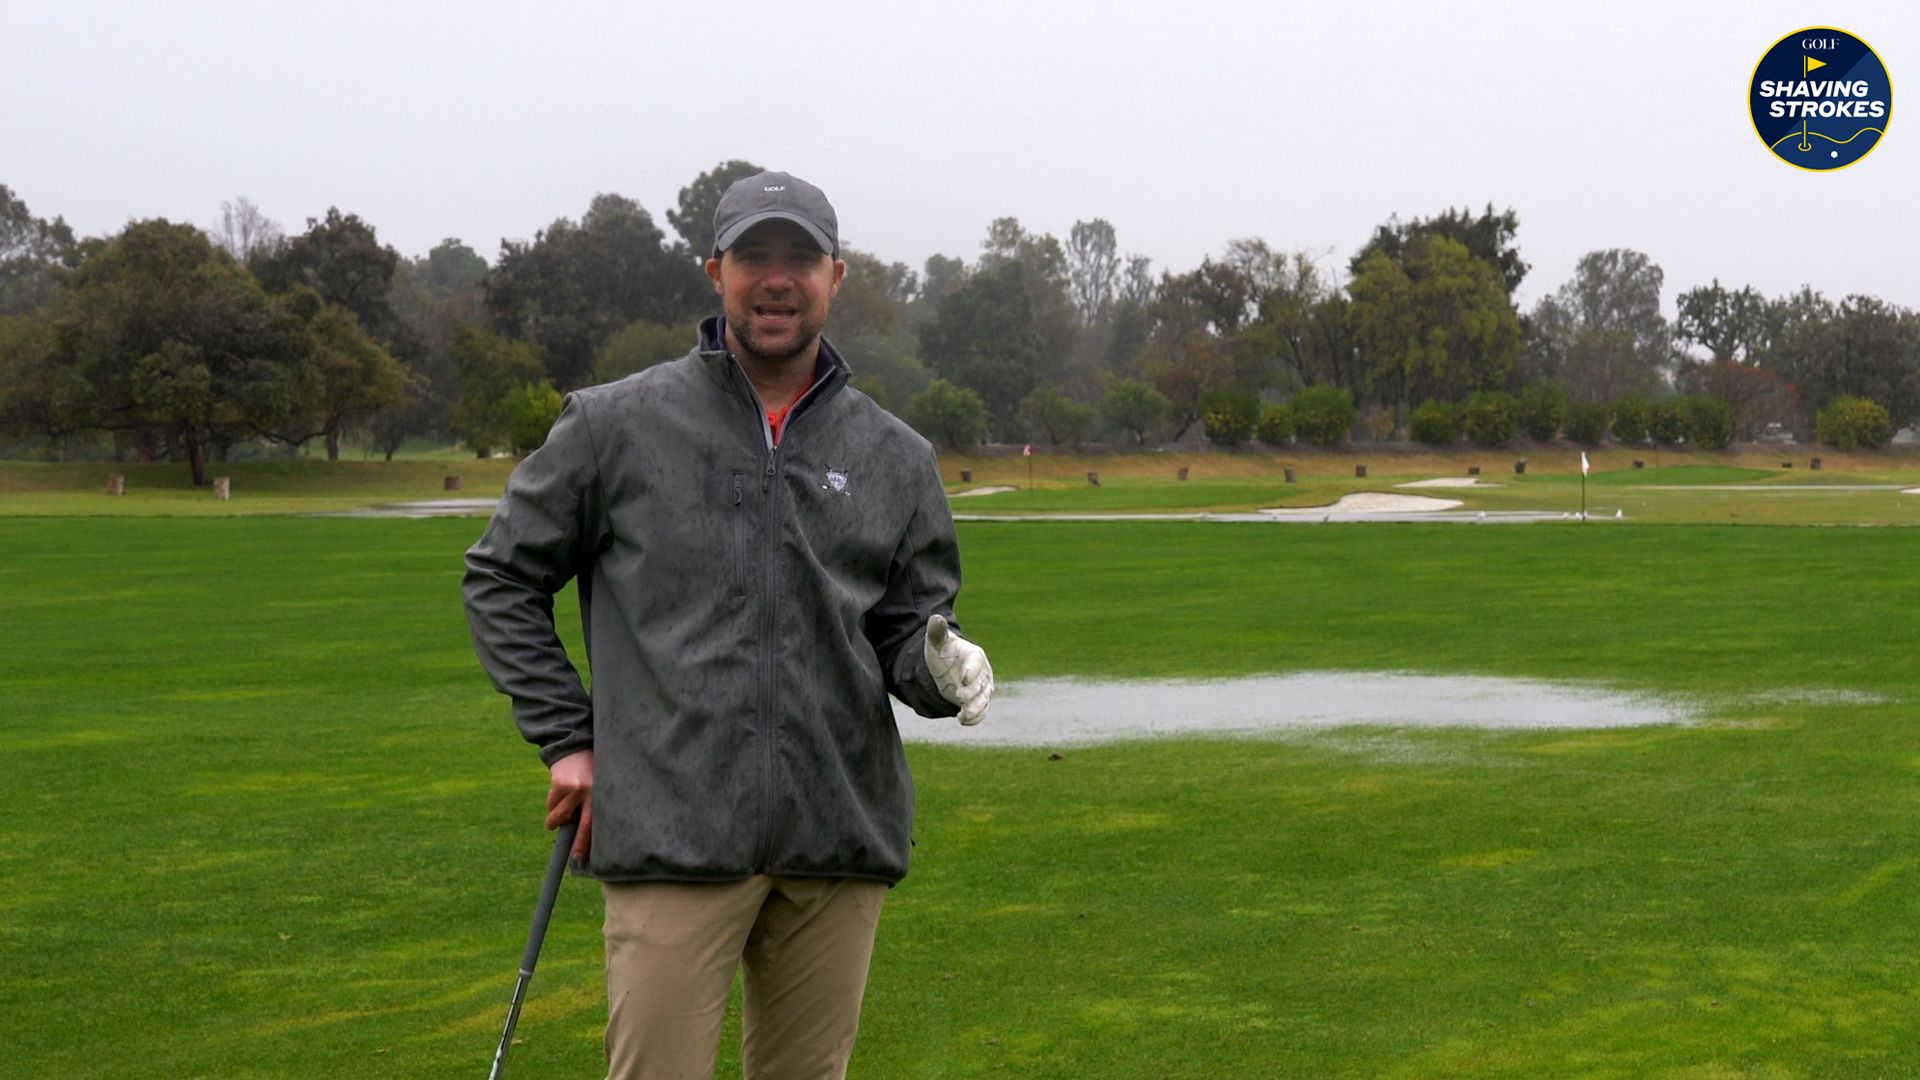 Follow these tips for playing in rainy conditions